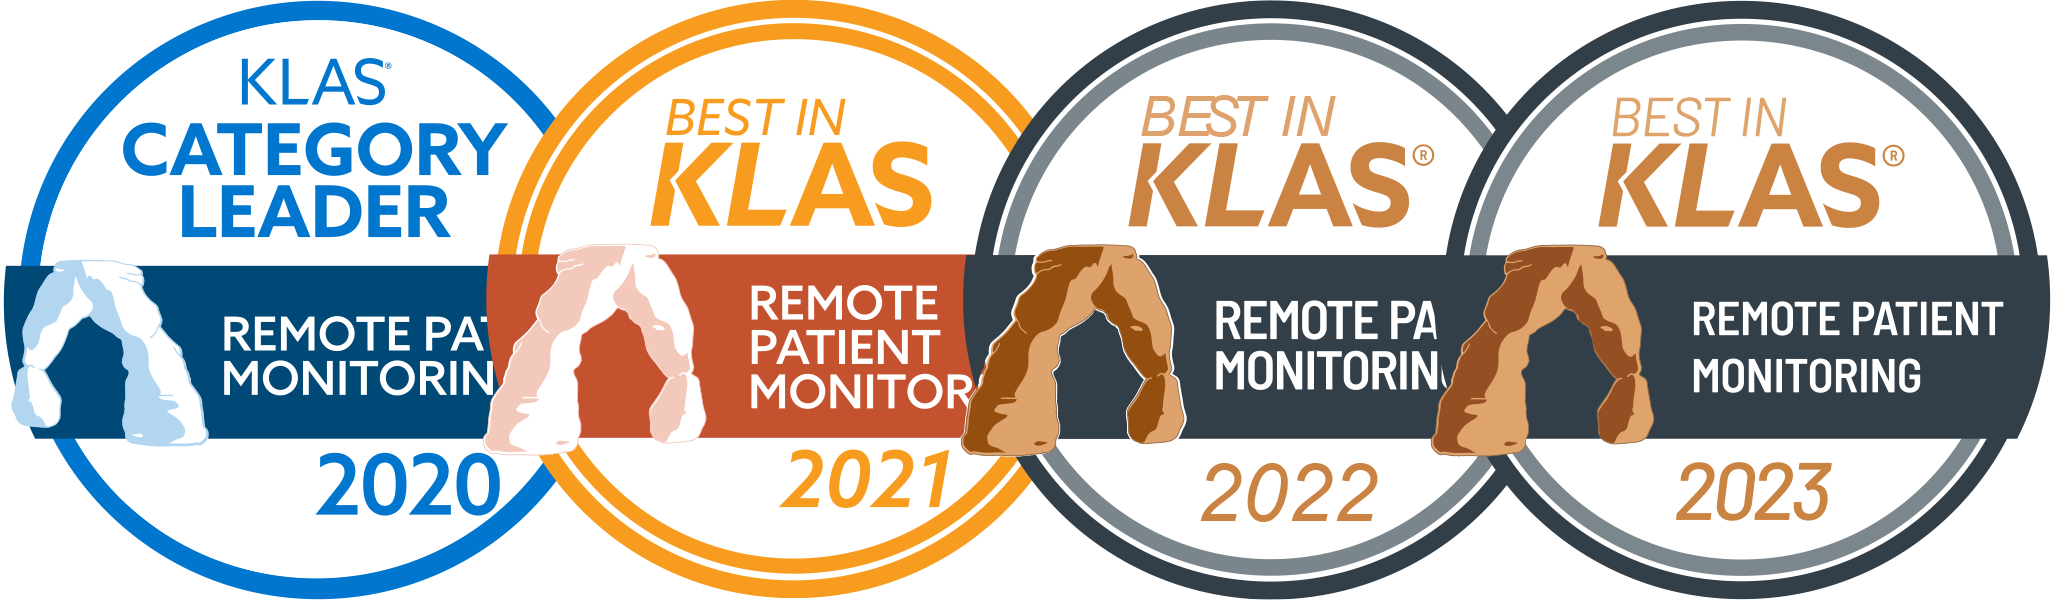 Best in KLAS award icons for 2020, 2021, 2022 and 2023 naming HRS the winner for remote patient monitoring